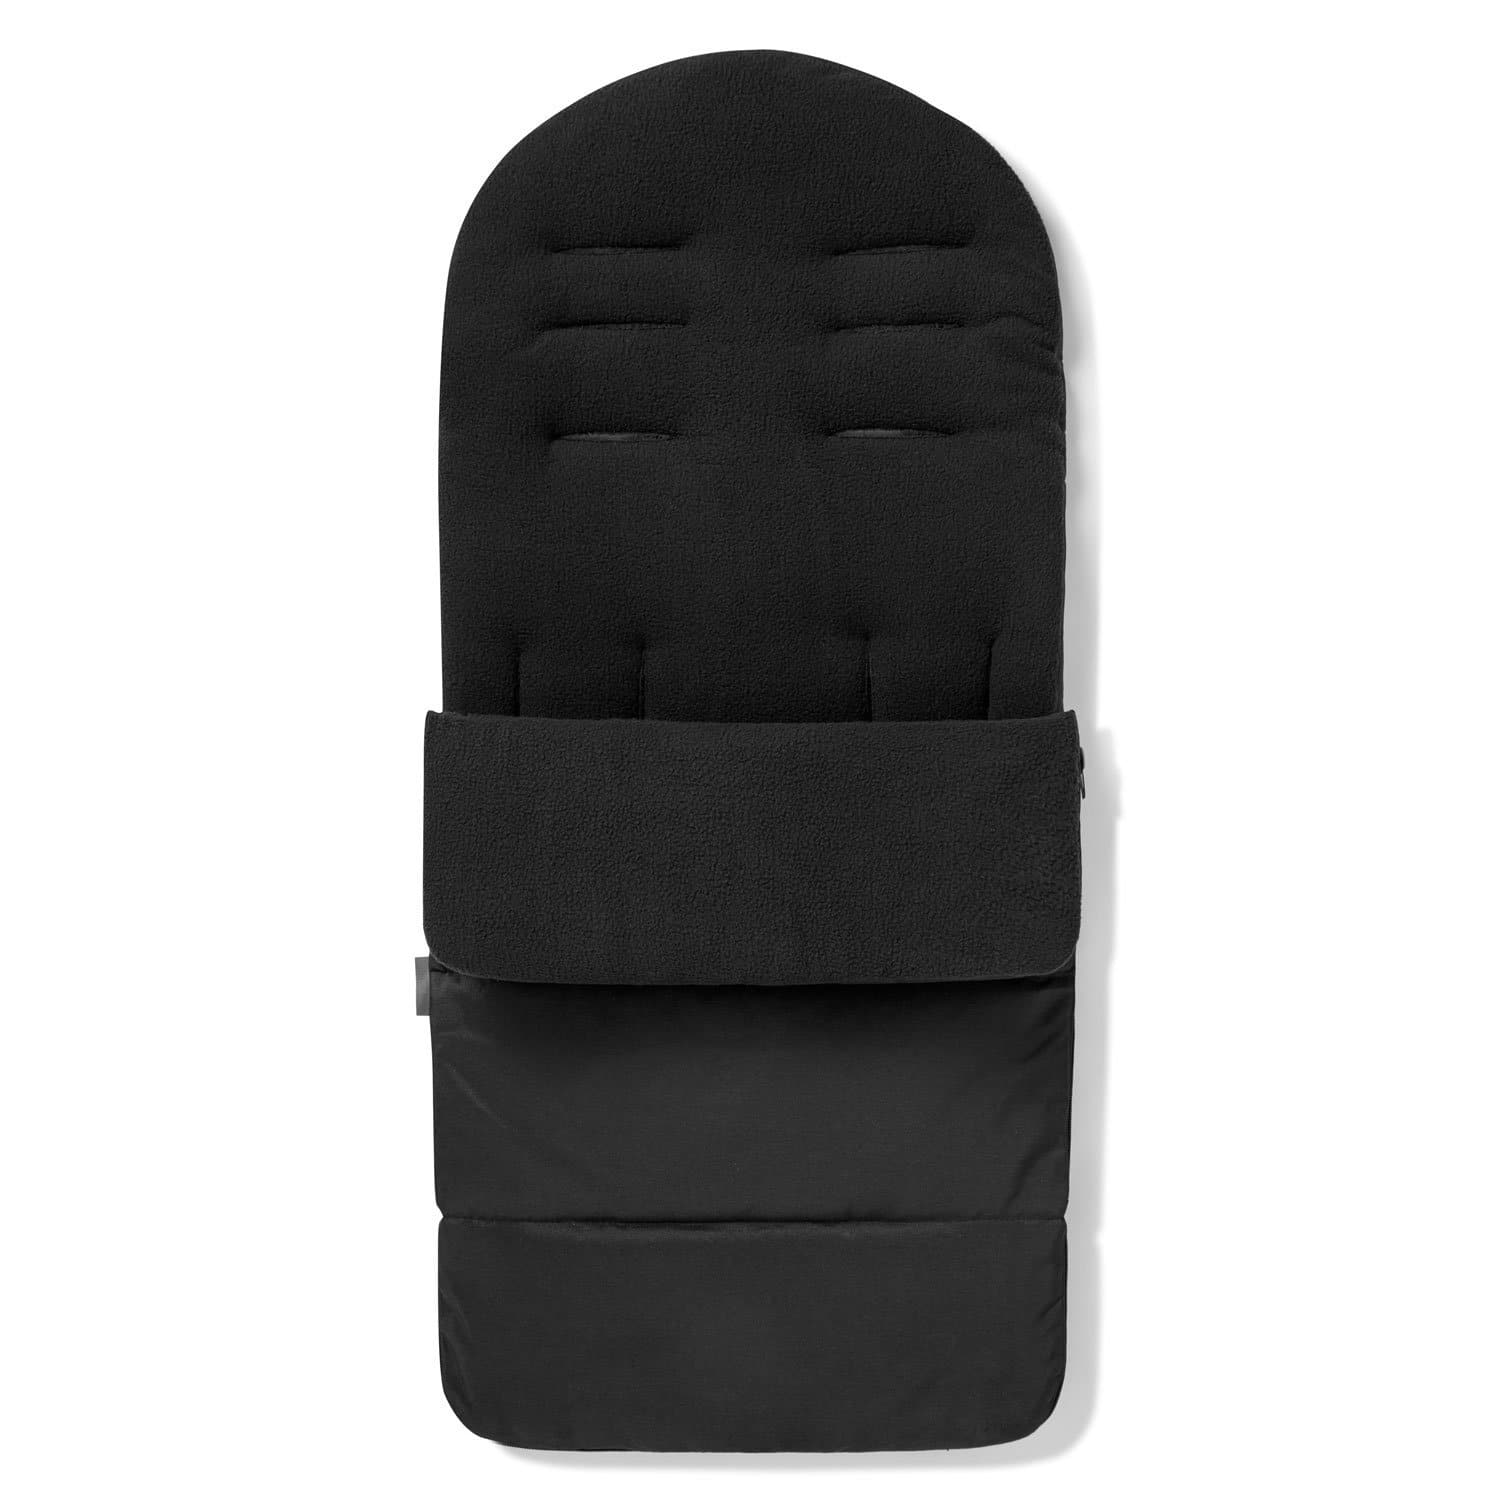 Premium Footmuff / Cosy Toes Compatible with Chicco - Black Jack / Fits All Models | For Your Little One